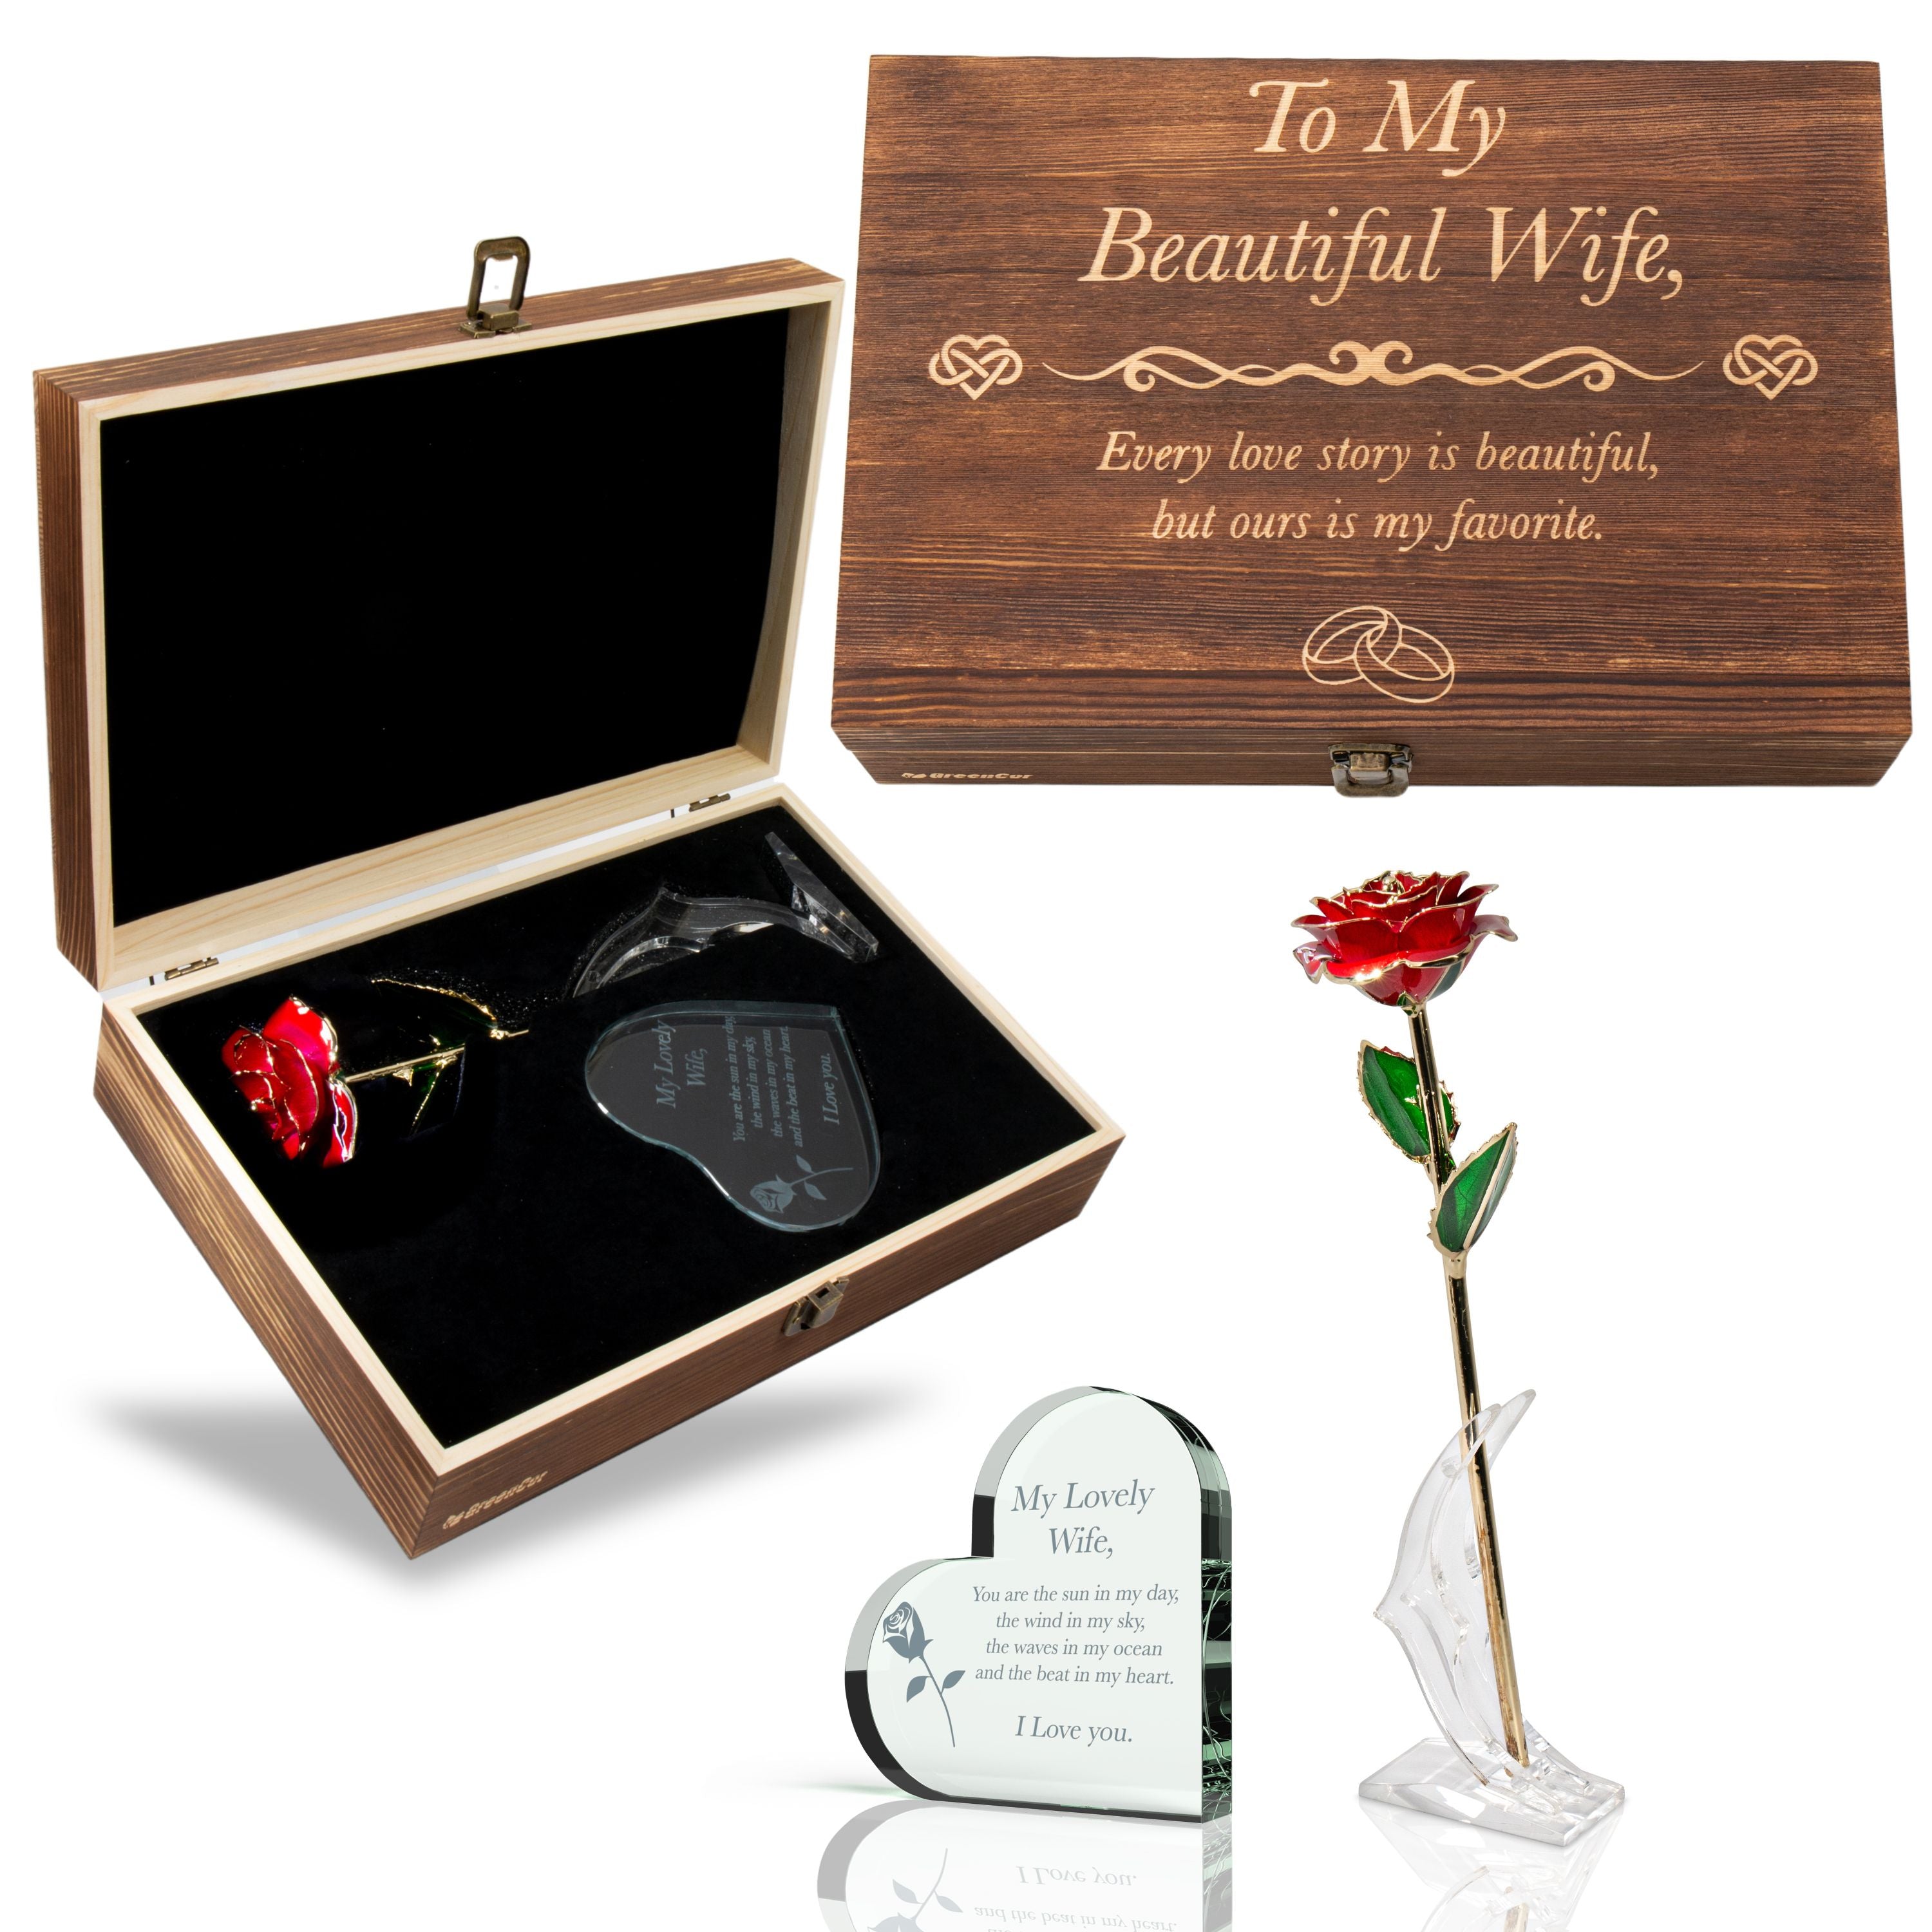 The Perfect Gift For Your Wife- "To My Beautiful Wife" Gift Set